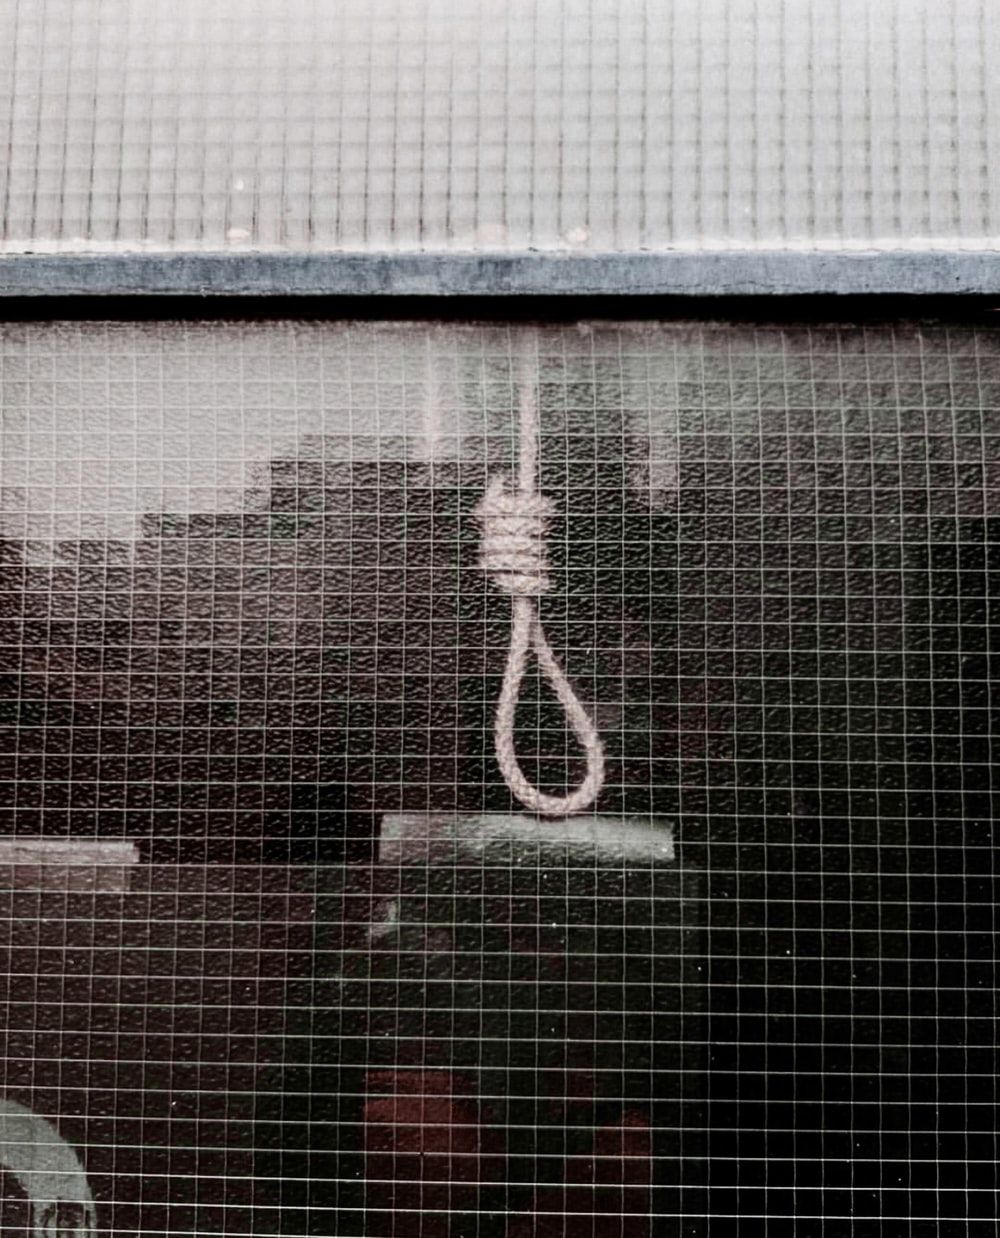 Hanging Noose Picture. Download Free Image